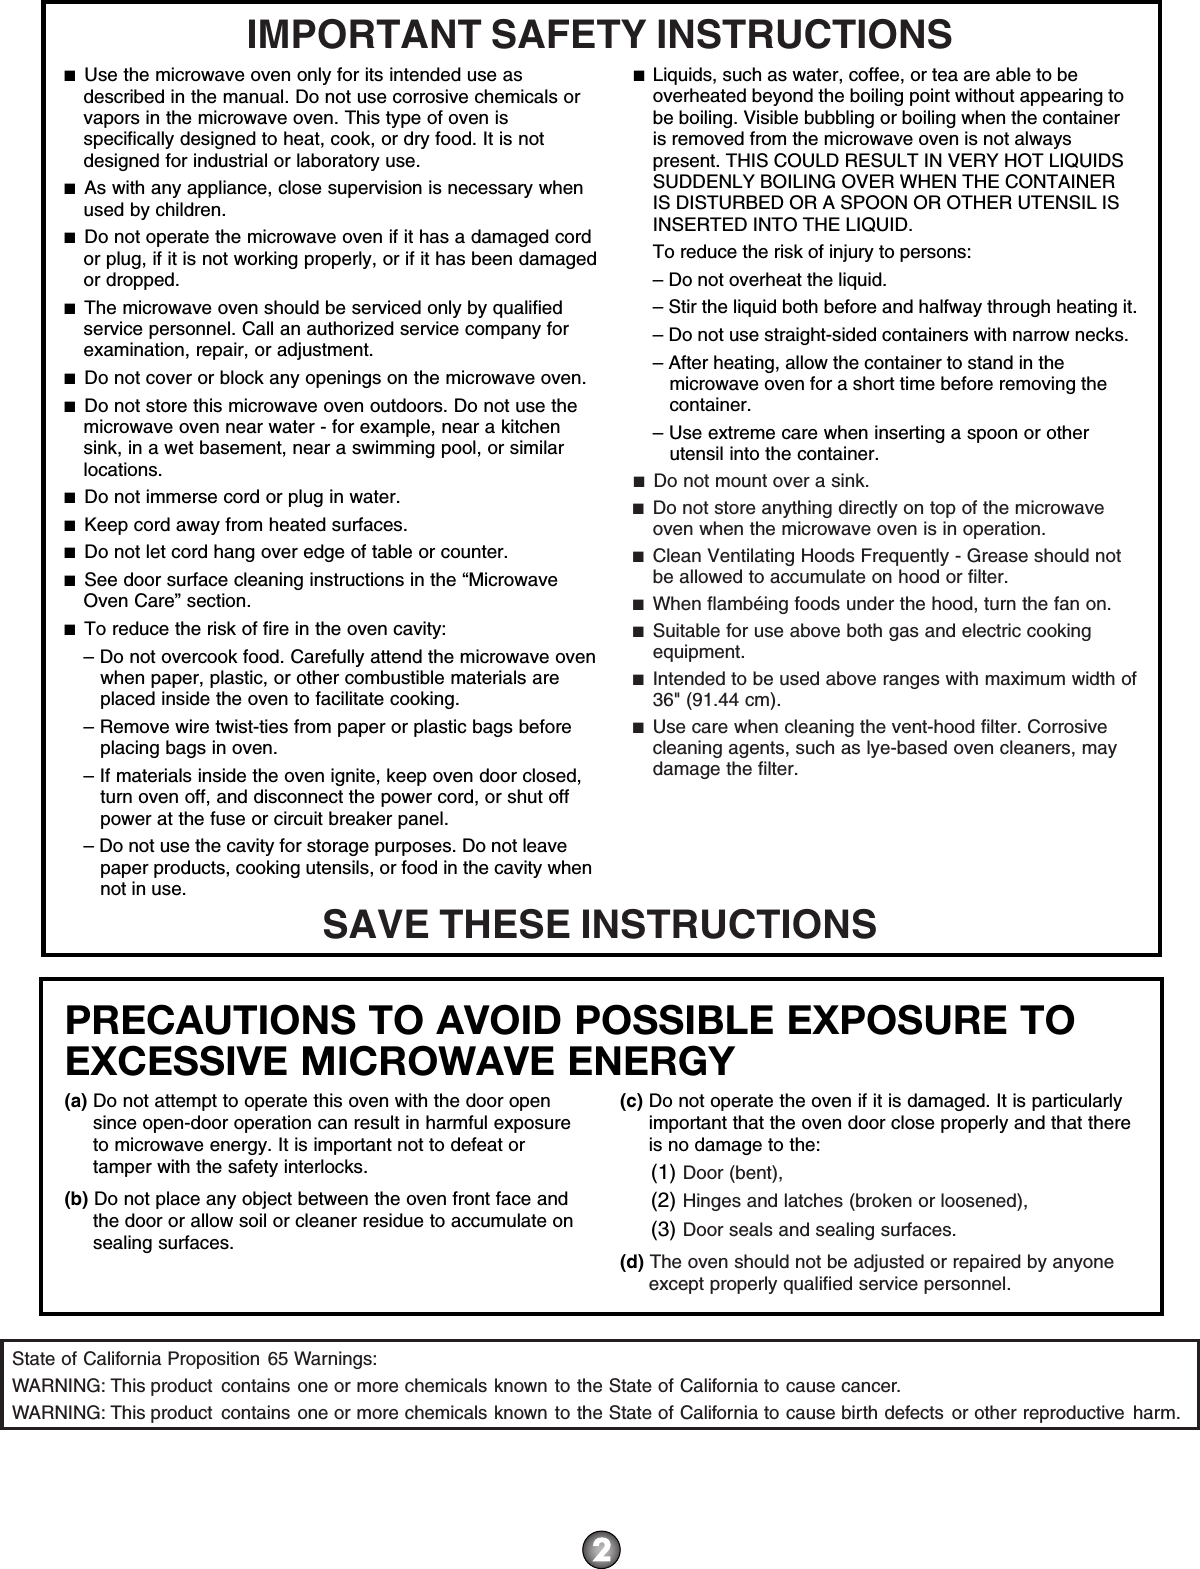 PRECAUTIONS TO AVOID POSSIBLE EXPOSURE TO EXCESSIVE MICROWAVE ENERGY (a) Do not attempt to operate this oven with the door open since open-door operation can result in harmful exposure to microwave energy. It is important not to defeat or tamper with the safety interlocks.(b) Do not place any object between the oven front face and the door or allow soil or cleaner residue to accumulate on sealing surfaces.(c) Do not operate the oven if it is damaged. It is particularly important that the oven door close properly and that there is no damage to the:(1) Door (bent),(2) Hinges and latches (broken or loosened),(3) Door seals and sealing surfaces.  (d) The oven should not be adjusted or repaired by anyone except properly qualified service personnel.IMPORTANT SAFETY INSTRUCTIONSSAVE THESE INSTRUCTIONS■  Use the microwave oven only for its intended use as described in the manual. Do not use corrosive chemicals or vapors in the microwave oven. This type of oven is specifically designed to heat, cook, or dry food. It is not designed for industrial or laboratory use. ■  As with any appliance, close supervision is necessary when used by children. ■  Do not operate the microwave oven if it has a damaged cord or plug, if it is not working properly, or if it has been damaged or dropped.■  The microwave oven should be serviced only by qualified service personnel. Call an authorized service company for examination, repair, or adjustment. ■  Do not cover or block any openings on the microwave oven. ■  Do not store this microwave oven outdoors. Do not use the microwave oven near water - for example, near a kitchen sink, in a wet basement, near a swimming pool, or similar locations.■  Do not immerse cord or plug in water. ■  Keep cord away from heated surfaces. ■  Do not let cord hang over edge of table or counter. ■  See door surface cleaning instructions in the “Microwave Oven Care” section.■  To reduce the risk of fire in the oven cavity:– Do not overcook food. Carefully attend the microwave oven when paper, plastic, or other combustible materials are placed inside the oven to facilitate cooking. – Remove wire twist-ties from paper or plastic bags before placing bags in oven.– If materials inside the oven ignite, keep oven door closed, turn oven off, and disconnect the power cord, or shut off power at the fuse or circuit breaker panel.– Do not use the cavity for storage purposes. Do not leave paper products, cooking utensils, or food in the cavity when not in use.■  Liquids, such as water, coffee, or tea are able to be overheated beyond the boiling point without appearing to be boiling. Visible bubbling or boiling when the container is removed from the microwave oven is not always present. THIS COULD RESULT IN VERY HOT LIQUIDS SUDDENLY BOILING OVER WHEN THE CONTAINER IS DISTURBED OR A SPOON OR OTHER UTENSIL IS INSERTED INTO THE LIQUID. To reduce the risk of injury to persons:– Do not overheat the liquid.– Stir the liquid both before and halfway through heating it.– Do not use straight-sided containers with narrow necks.– After heating, allow the container to stand in the microwave oven for a short time before removing the container.– Use extreme care when inserting a spoon or other utensil into the container.■  Do not mount over a sink. ■  Do not store anything directly on top of the microwave oven when the microwave oven is in operation.■  Clean Ventilating Hoods Frequently - Grease should not be allowed to accumulate on hood or filter.  ■  When flambéing foods under the hood, turn the fan on. ■  Suitable for use above both gas and electric cooking equipment.■  Intended to be used above ranges with maximum width of 36&quot; (91.44 cm).■  Use care when cleaning the vent-hood filter. Corrosive cleaning agents, such as lye-based oven cleaners, may damage the filter.State of California Proposition 65 Warnings:WARNING: This product  contains one or more chemicals known to the State of California to cause cancer.WARNING: This product  contains one or more chemicals known to the State of California to cause birth defects or other reproductive harm.